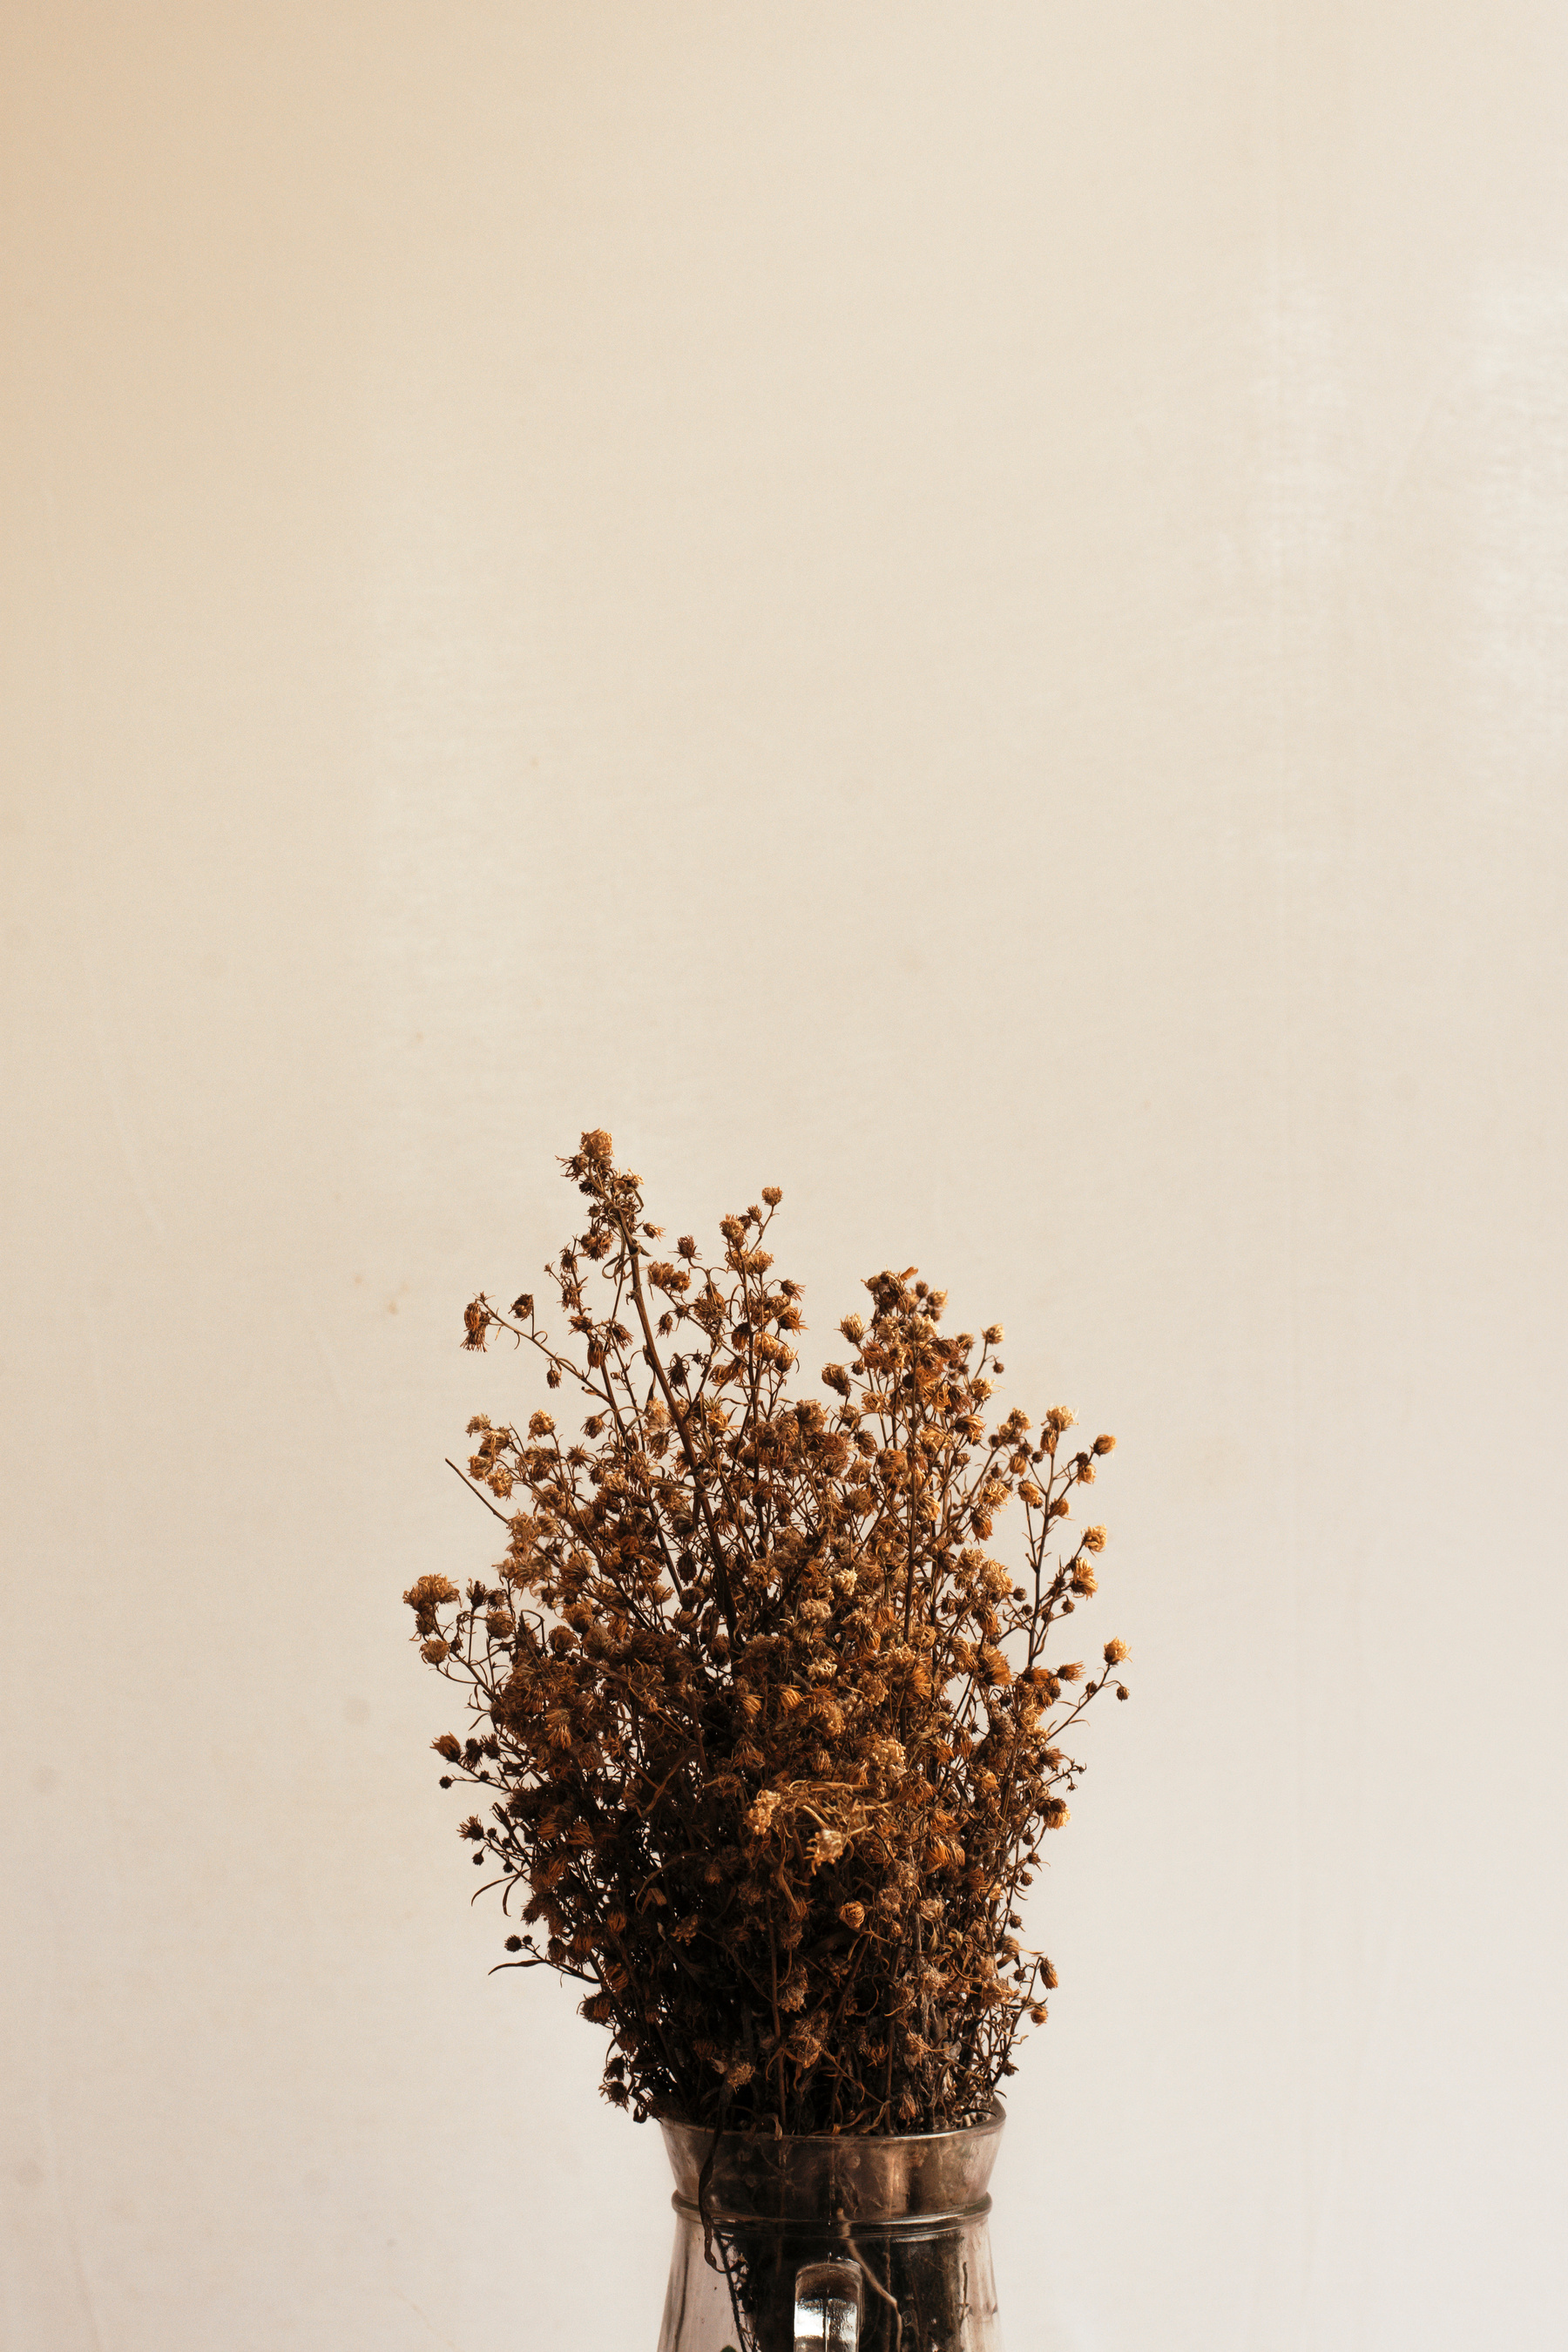 Dried Flowers on Beige Background